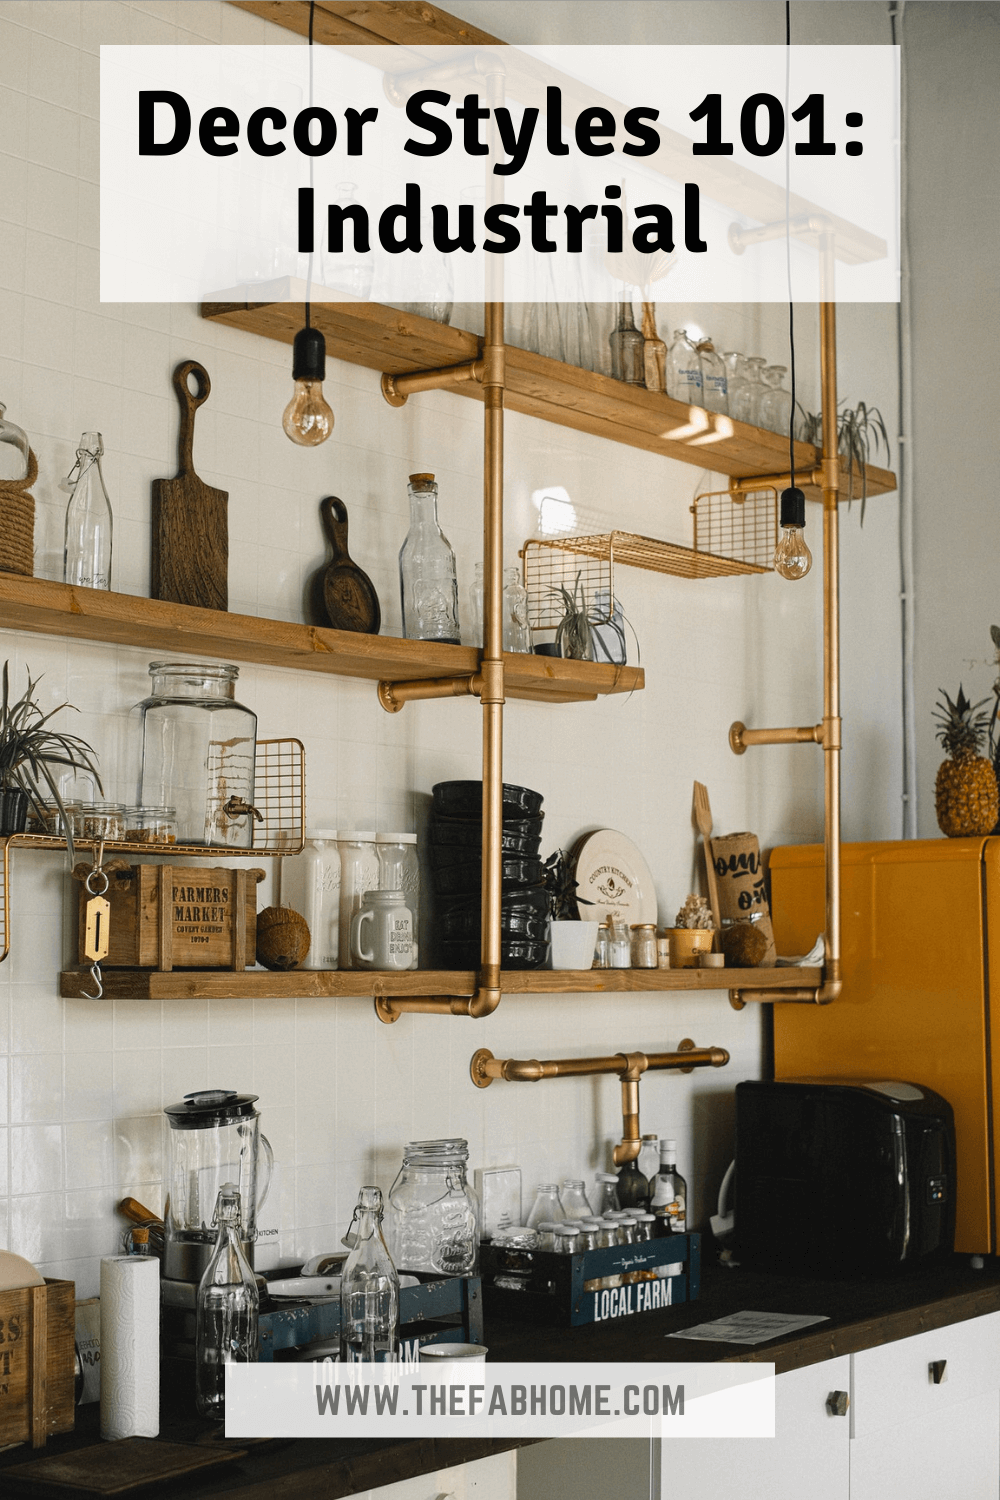 Keep things simple with the clean lines, hardy materials and open layout of industrial chic! Check out how you can bring home this popular decor style.